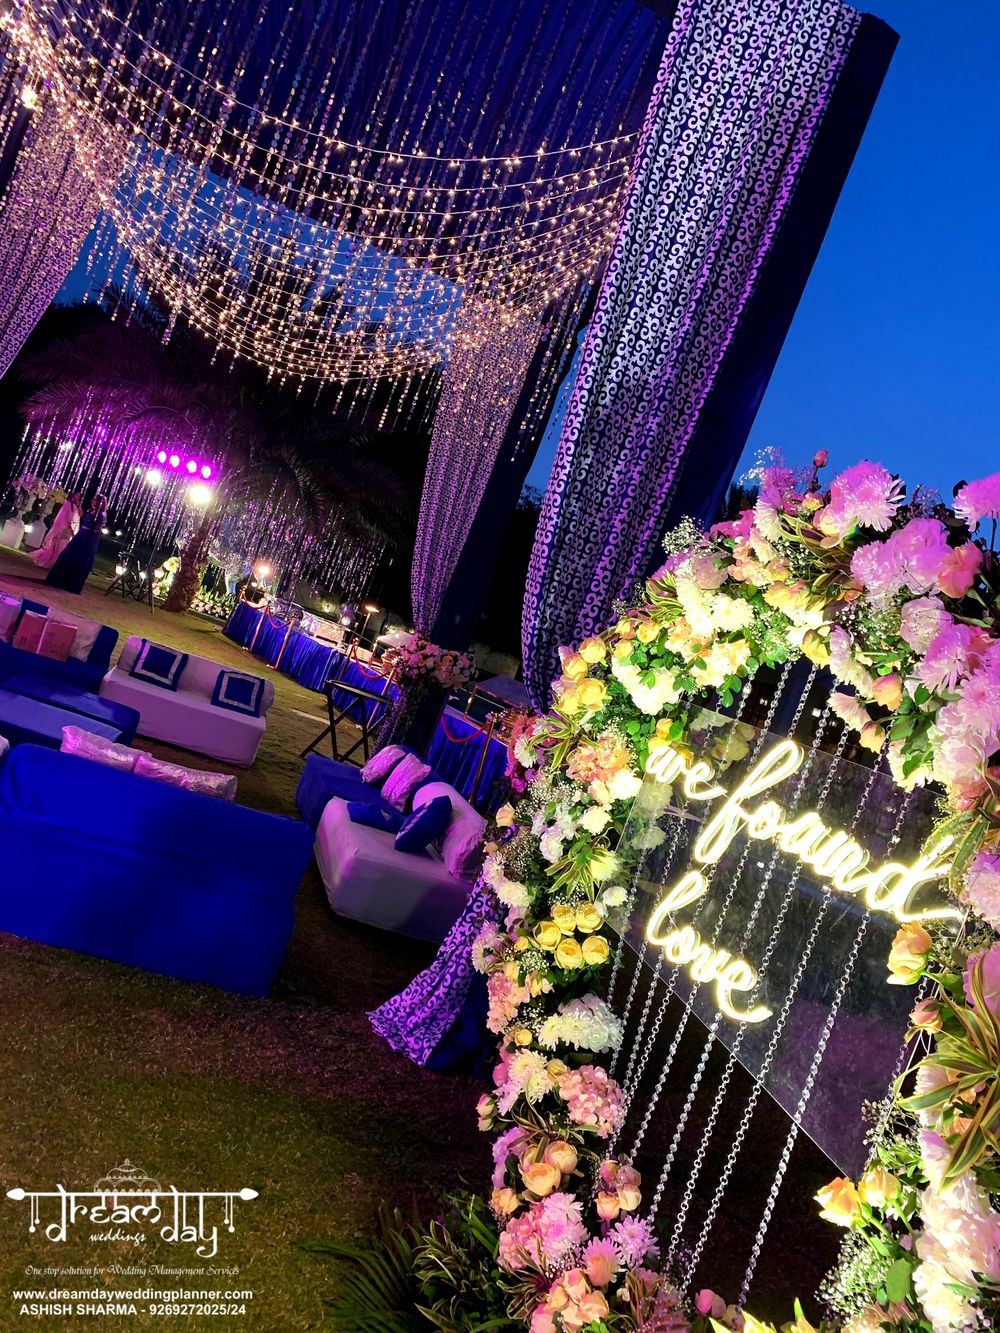 Photo From TAJ JaiMahal Palace - By Dream Day Wedding Planner